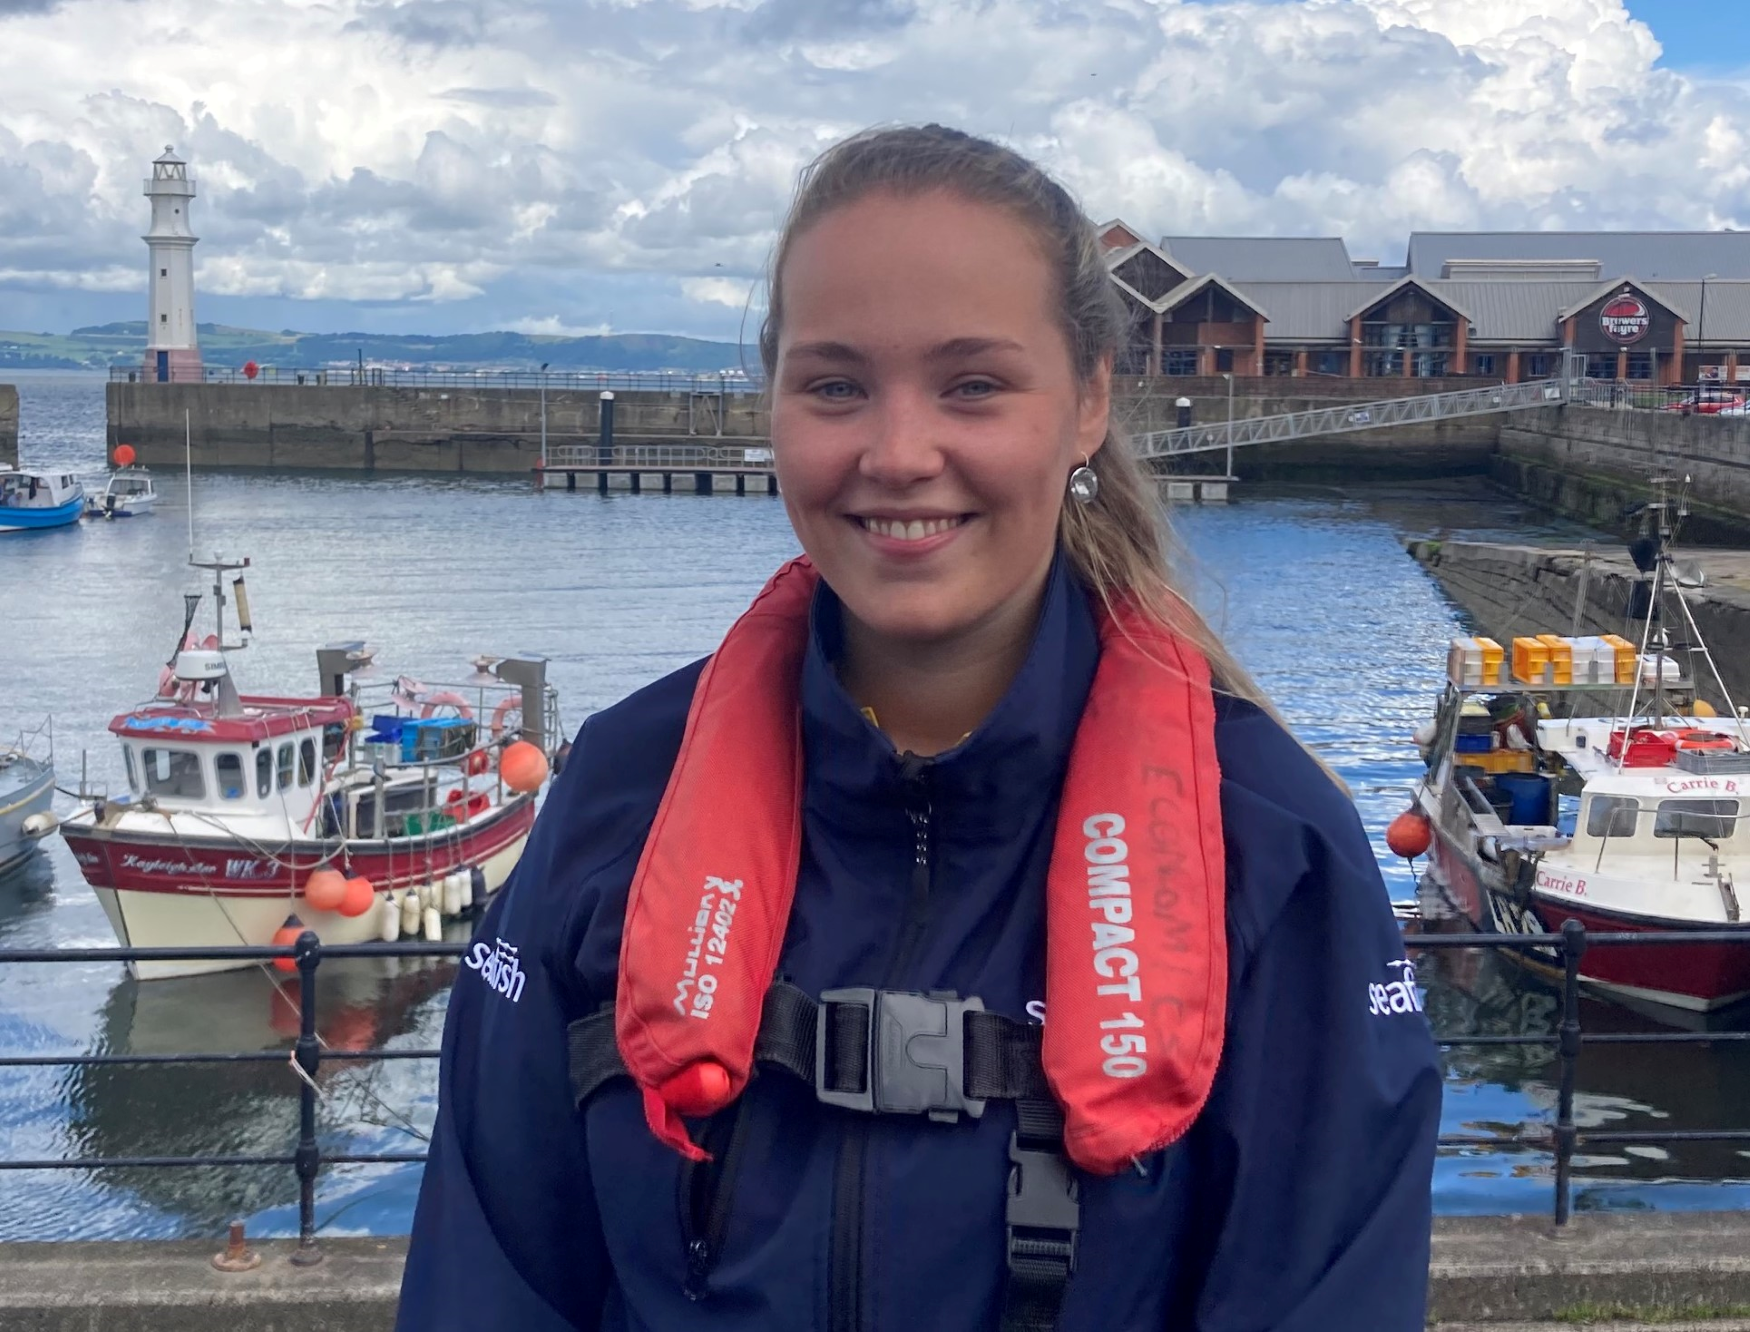 Field Researcher Emma at a harbour in front of fishing boats.